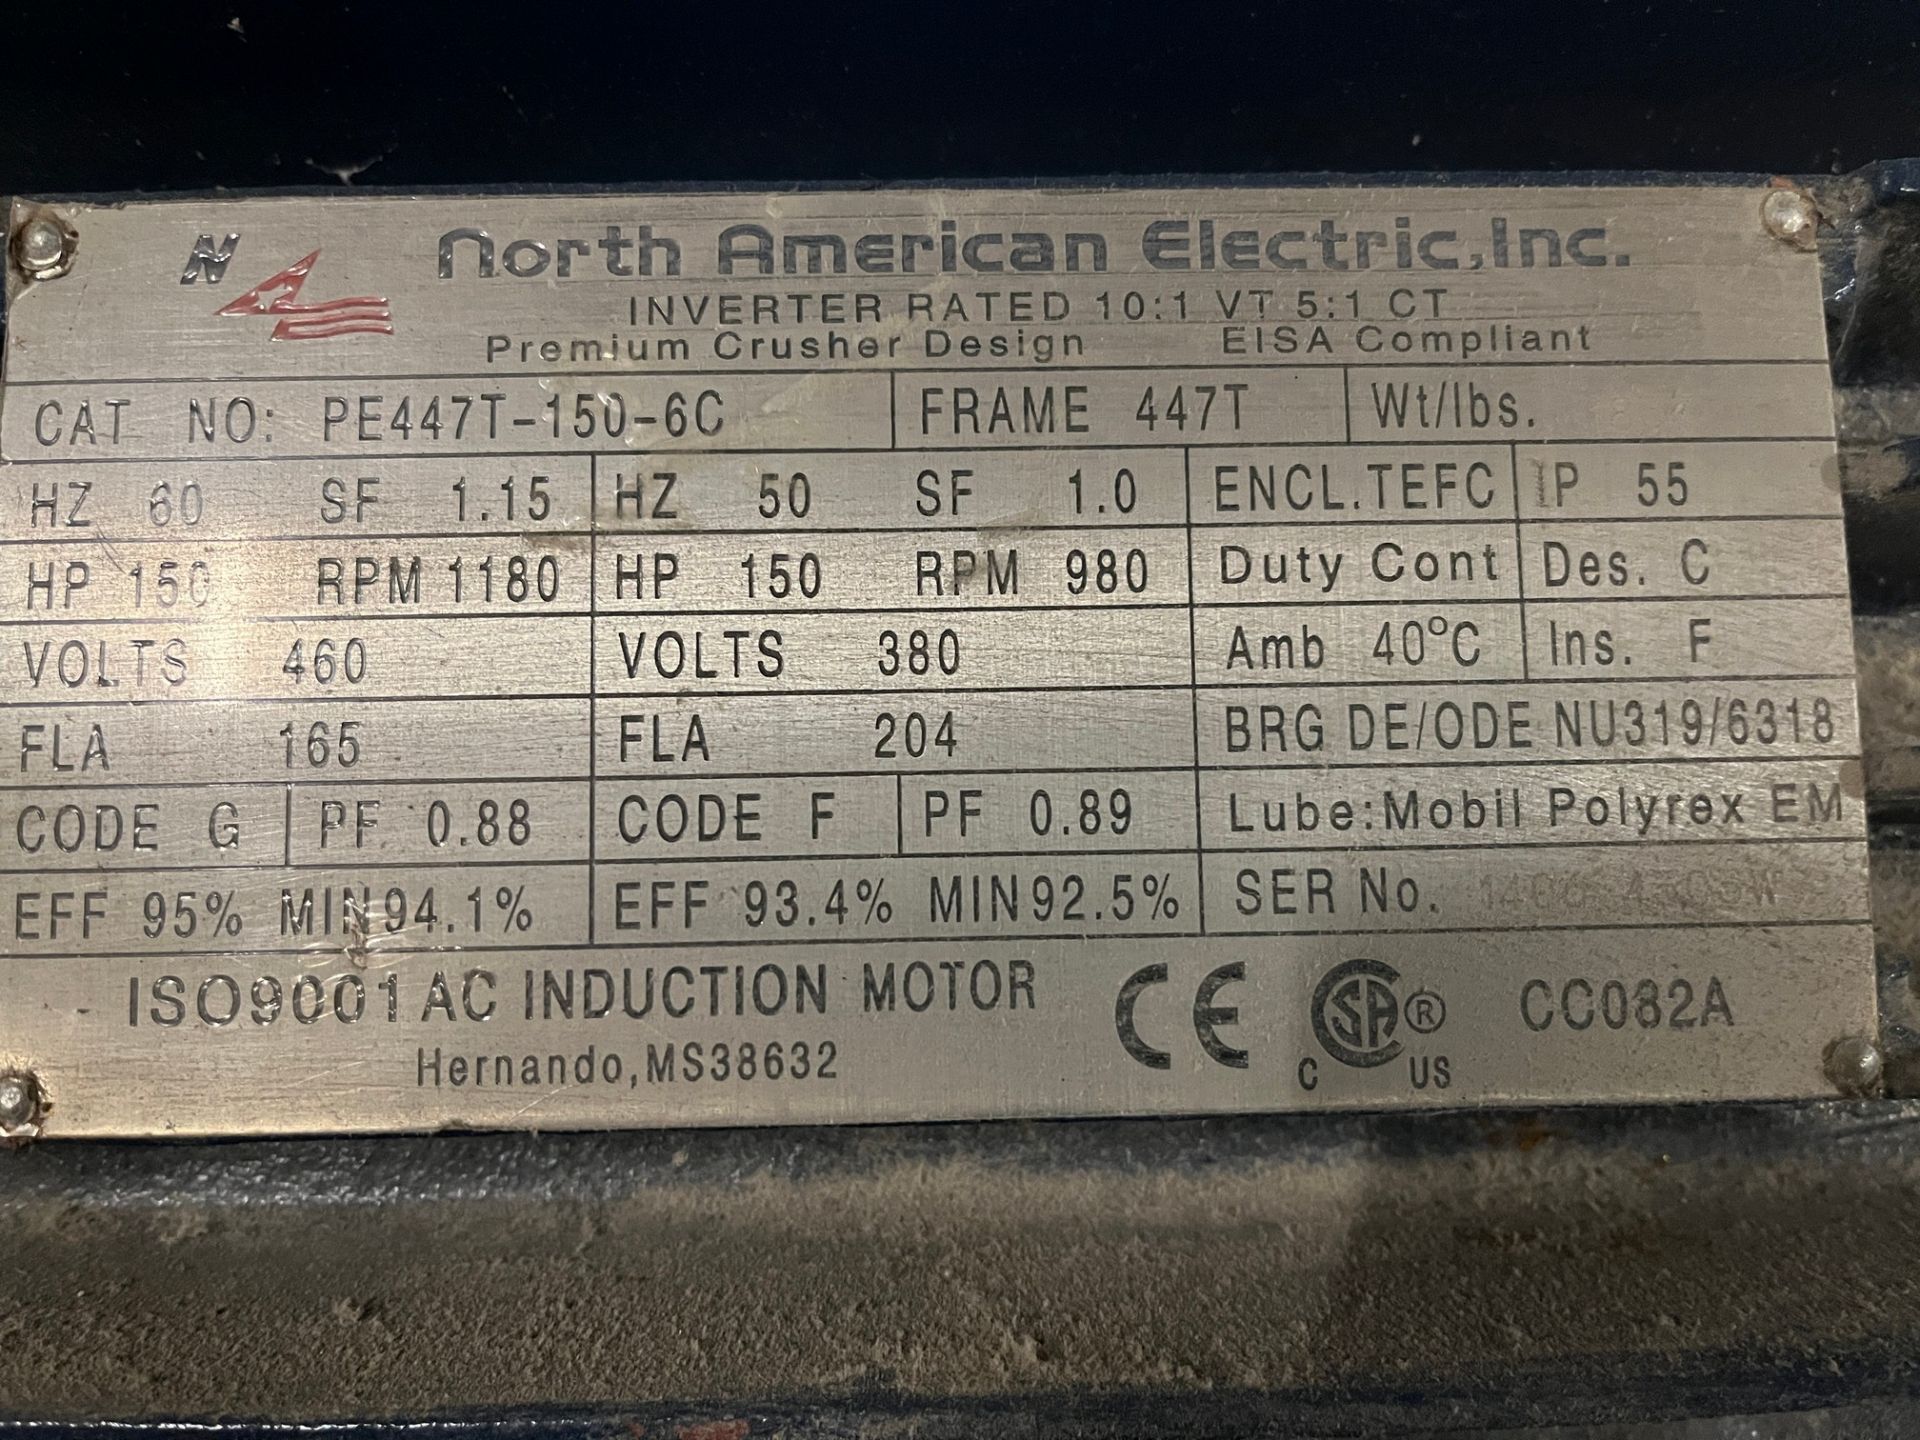 NORTH AMERICAN ELECTRIC AC INDUCTION MOTOR, 150HP, 1,180 RPM, 460V, 447T FRAME (PAPER MACHINE - Image 2 of 2